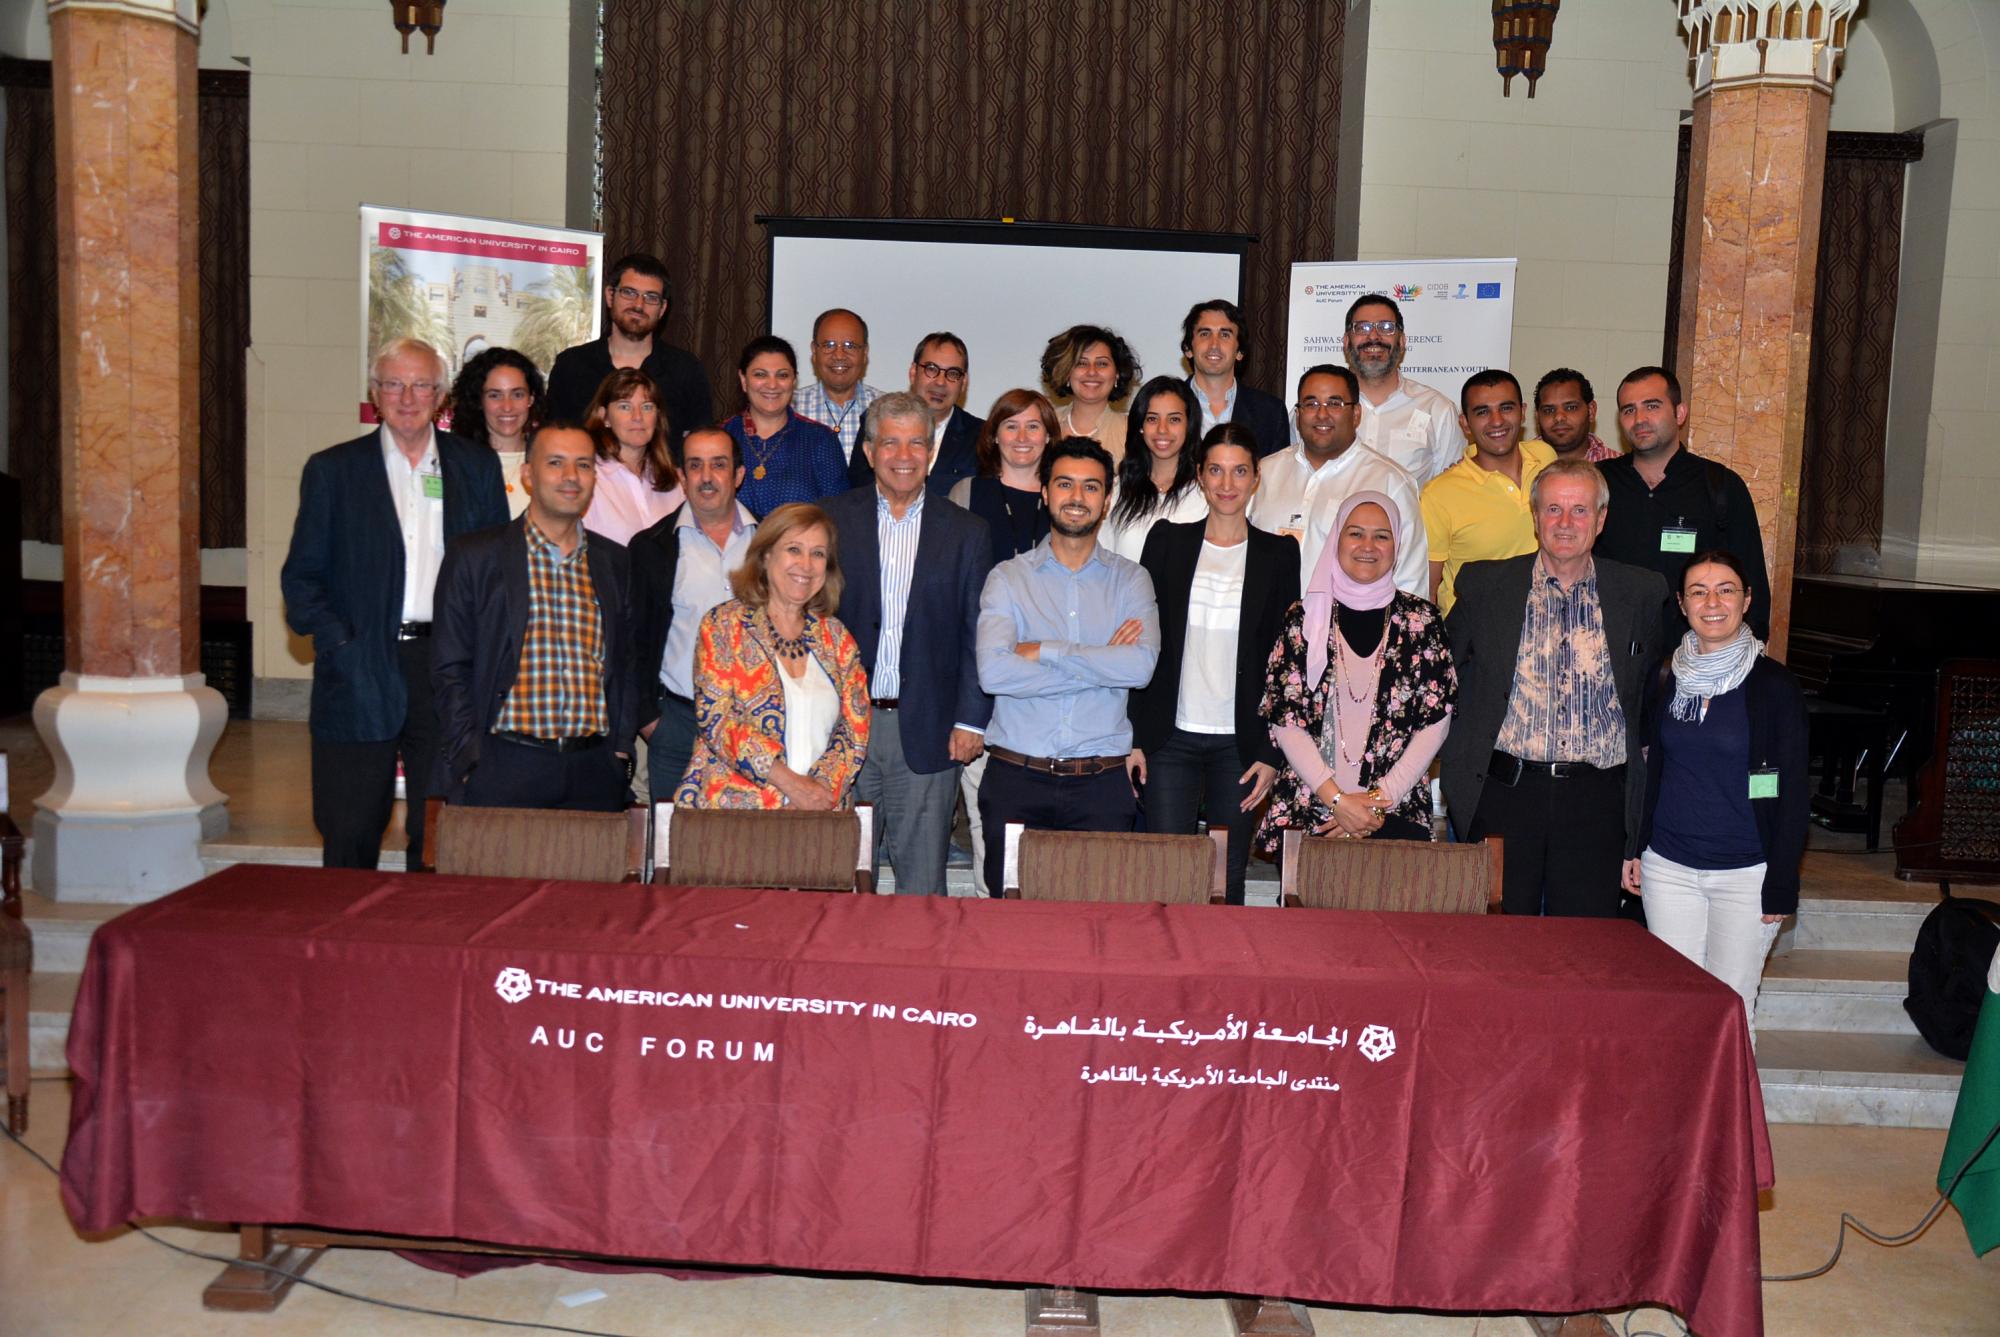 AUC is one of 14 partners in SAHWA, a three-year interdisciplinary project to research youth conditions in five different Arab countries